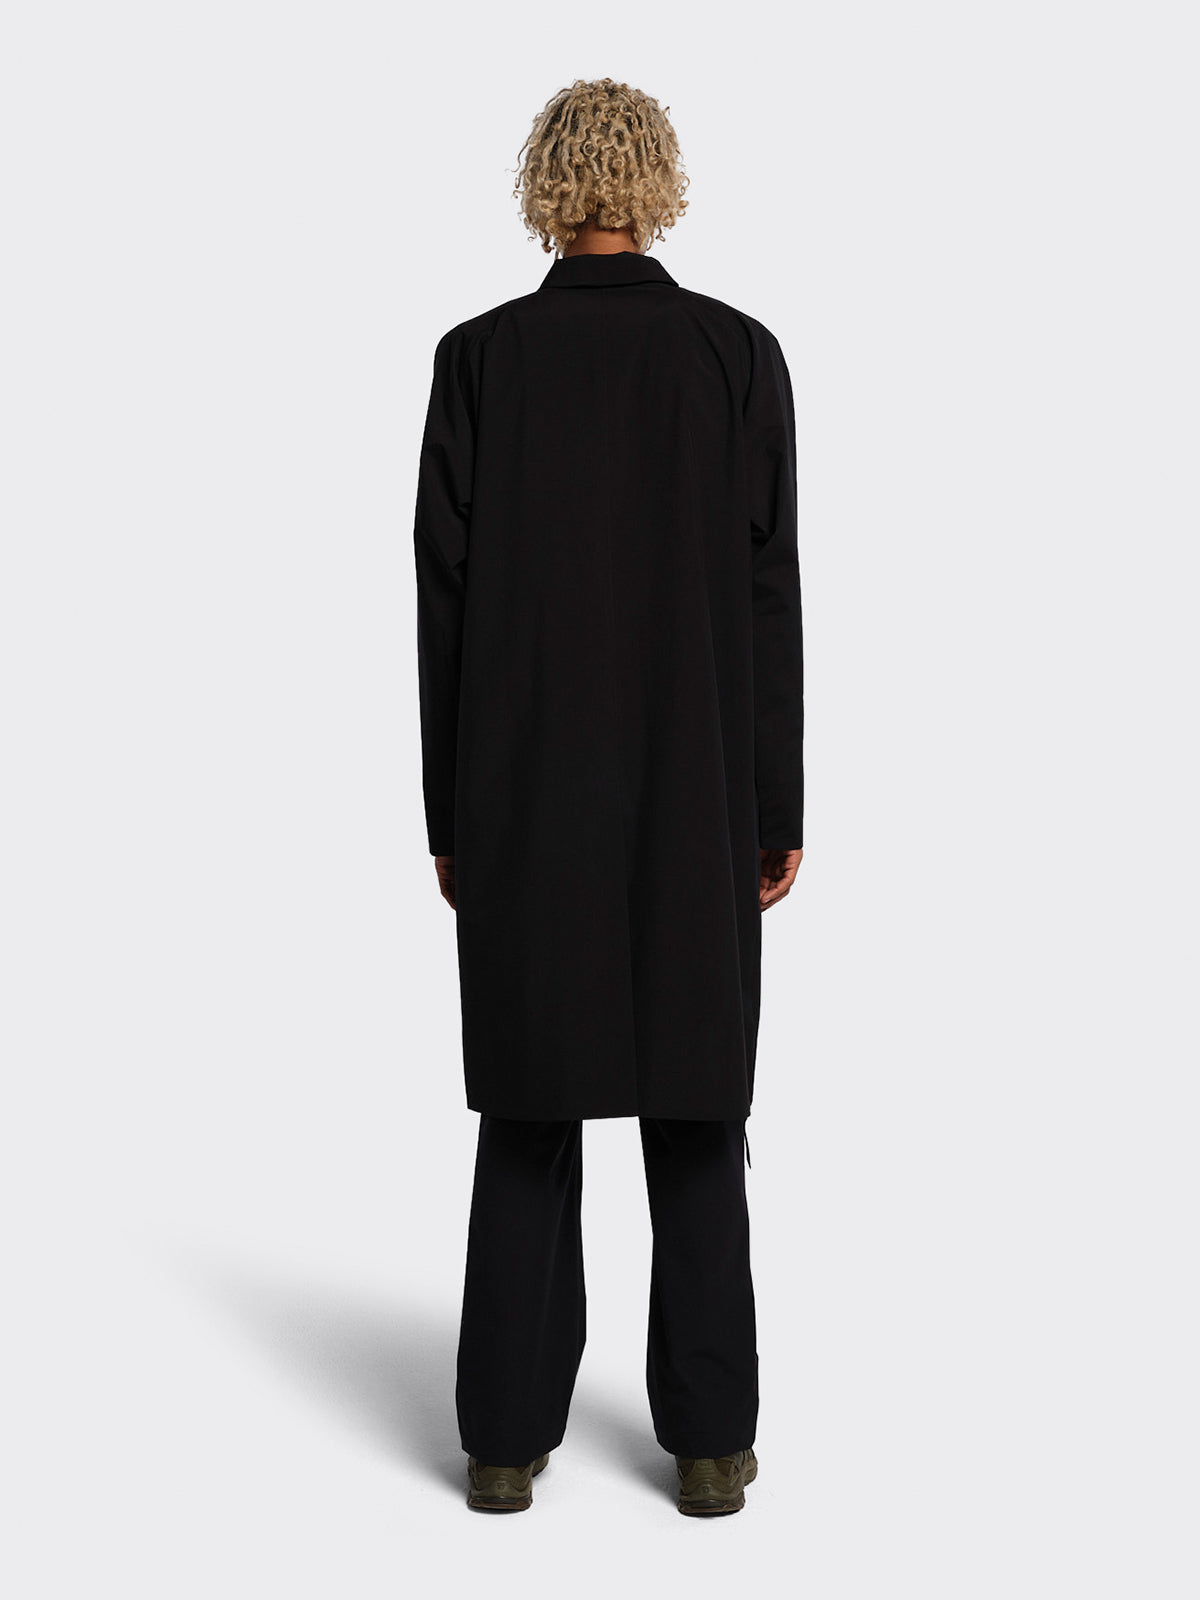 Man wearing Stad coat from Blæst in Black